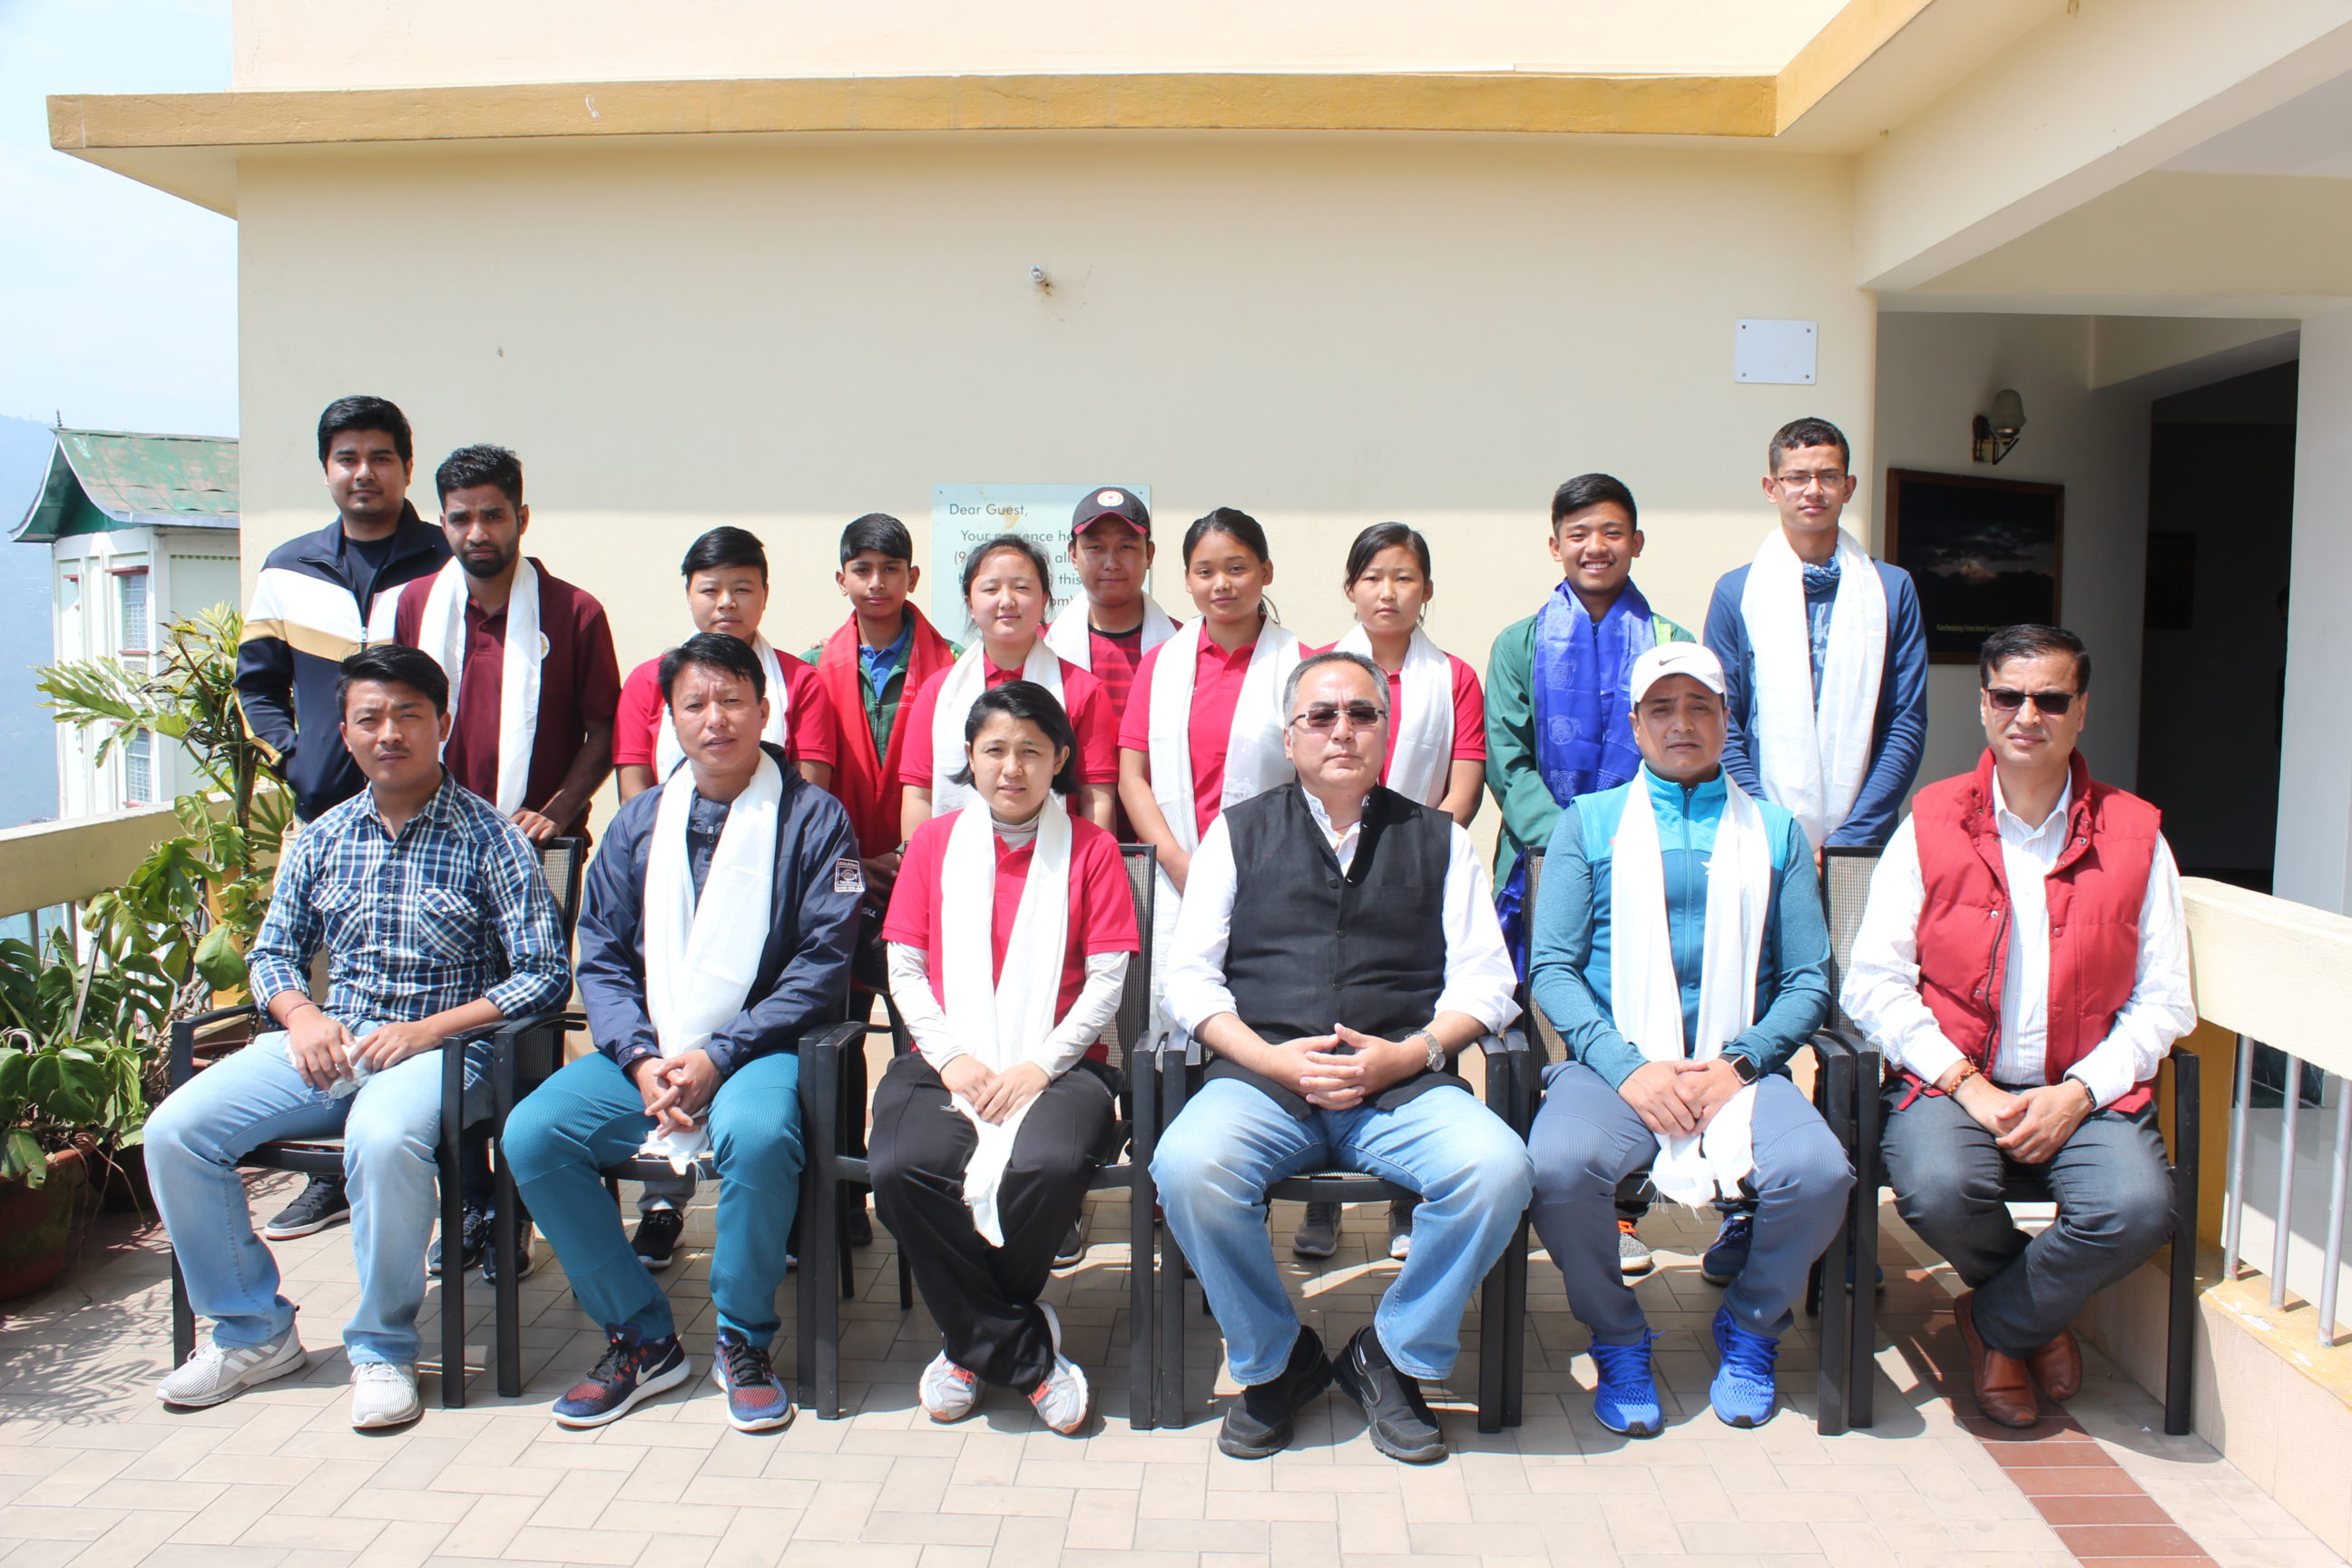 SCA hosts farewell lunch for players selected for Zonal Cricket Camp 2018 pic